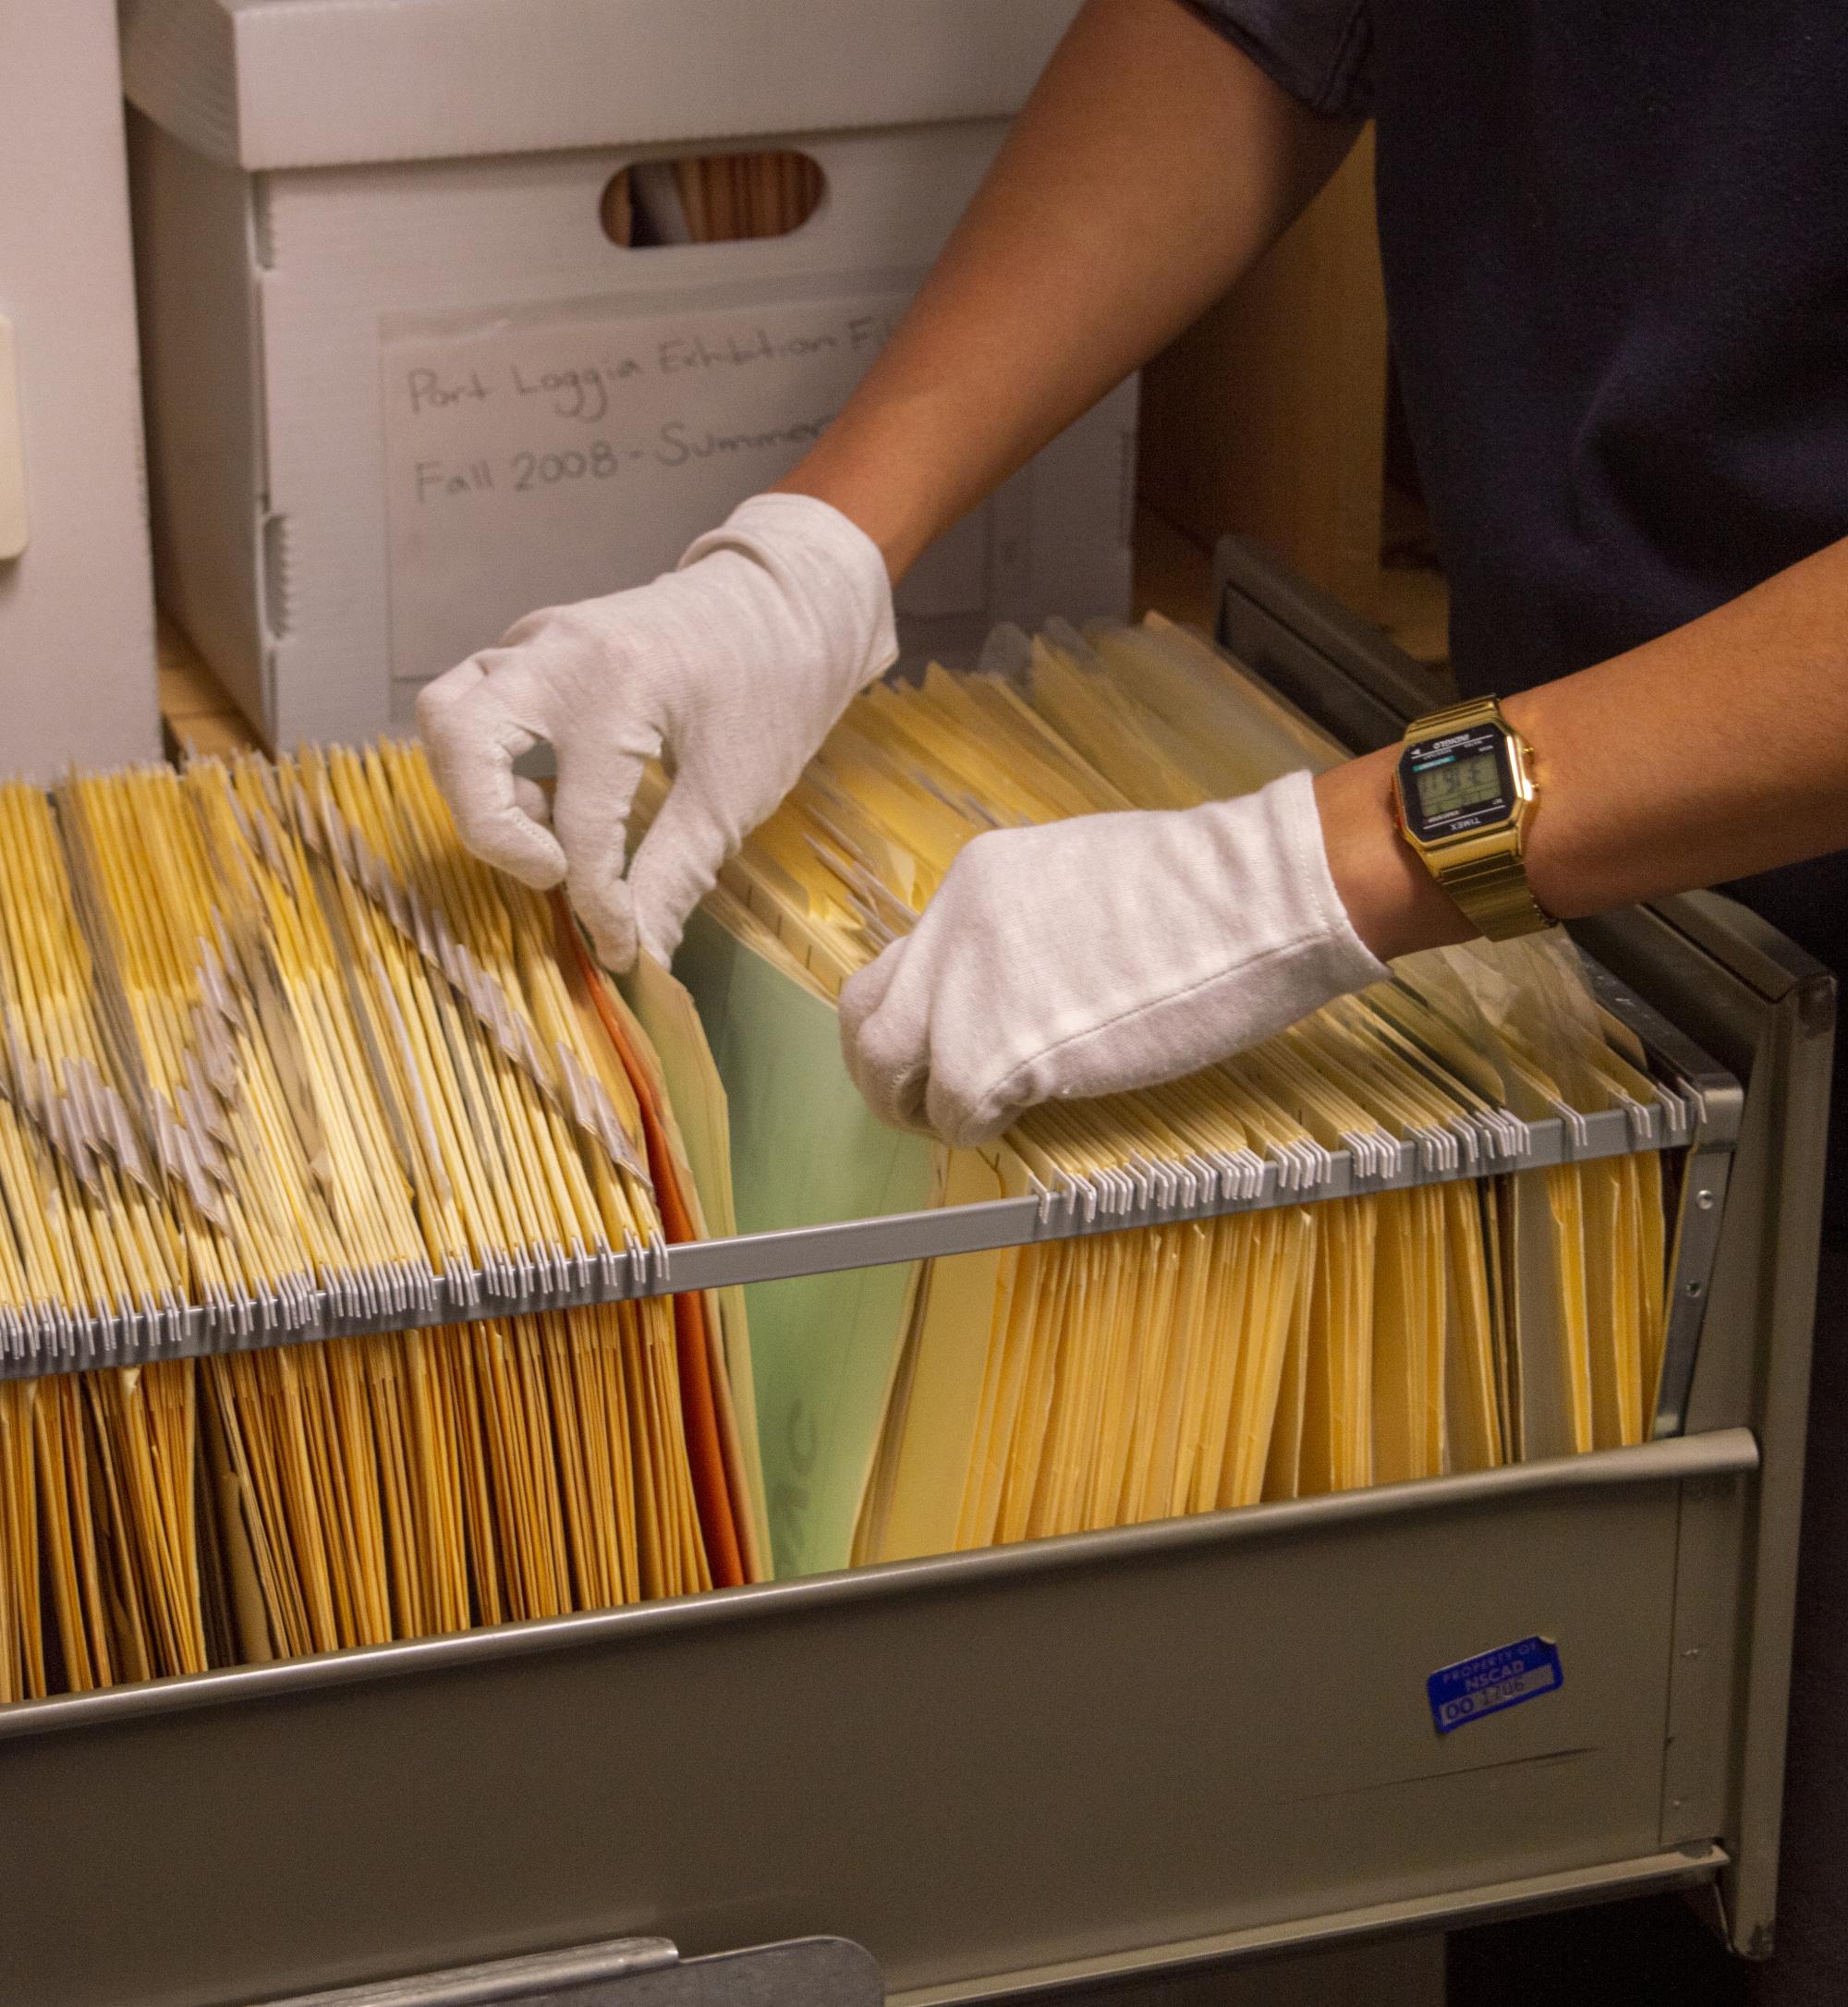 a person wearing white gloves searches through a filing cabinet of yellow manilla file folders